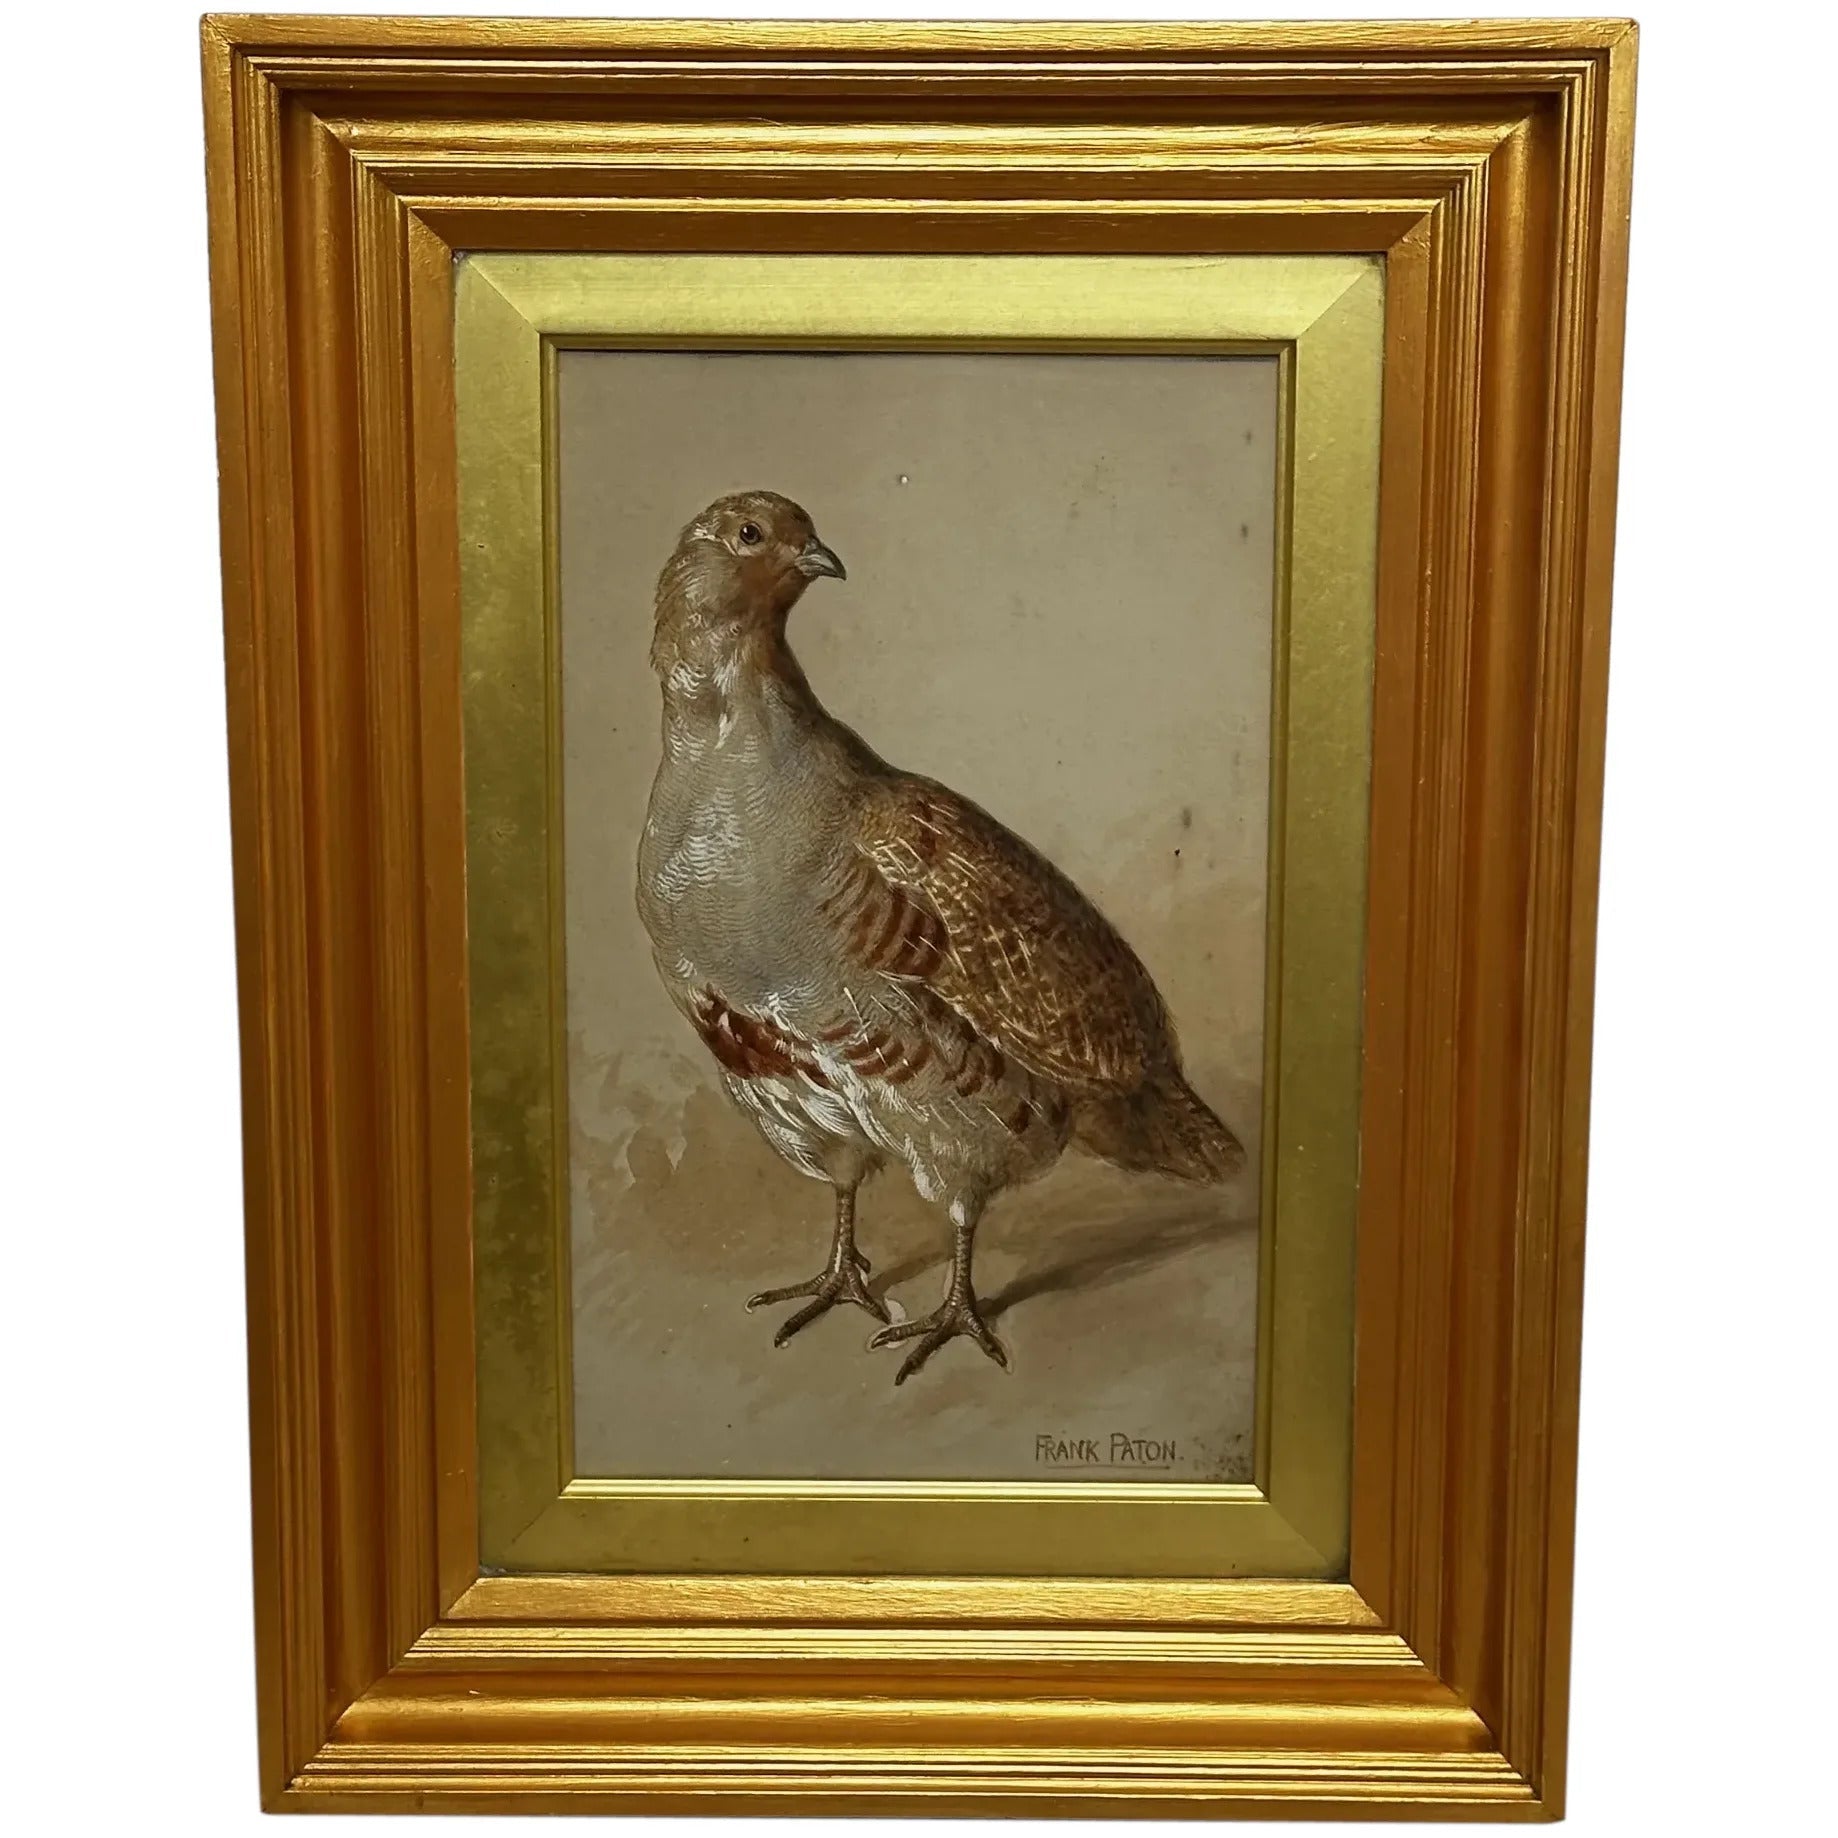 British Victorian Painting Partridge Game Bird Signed Frank Paton - Cheshire Antiques Consultant